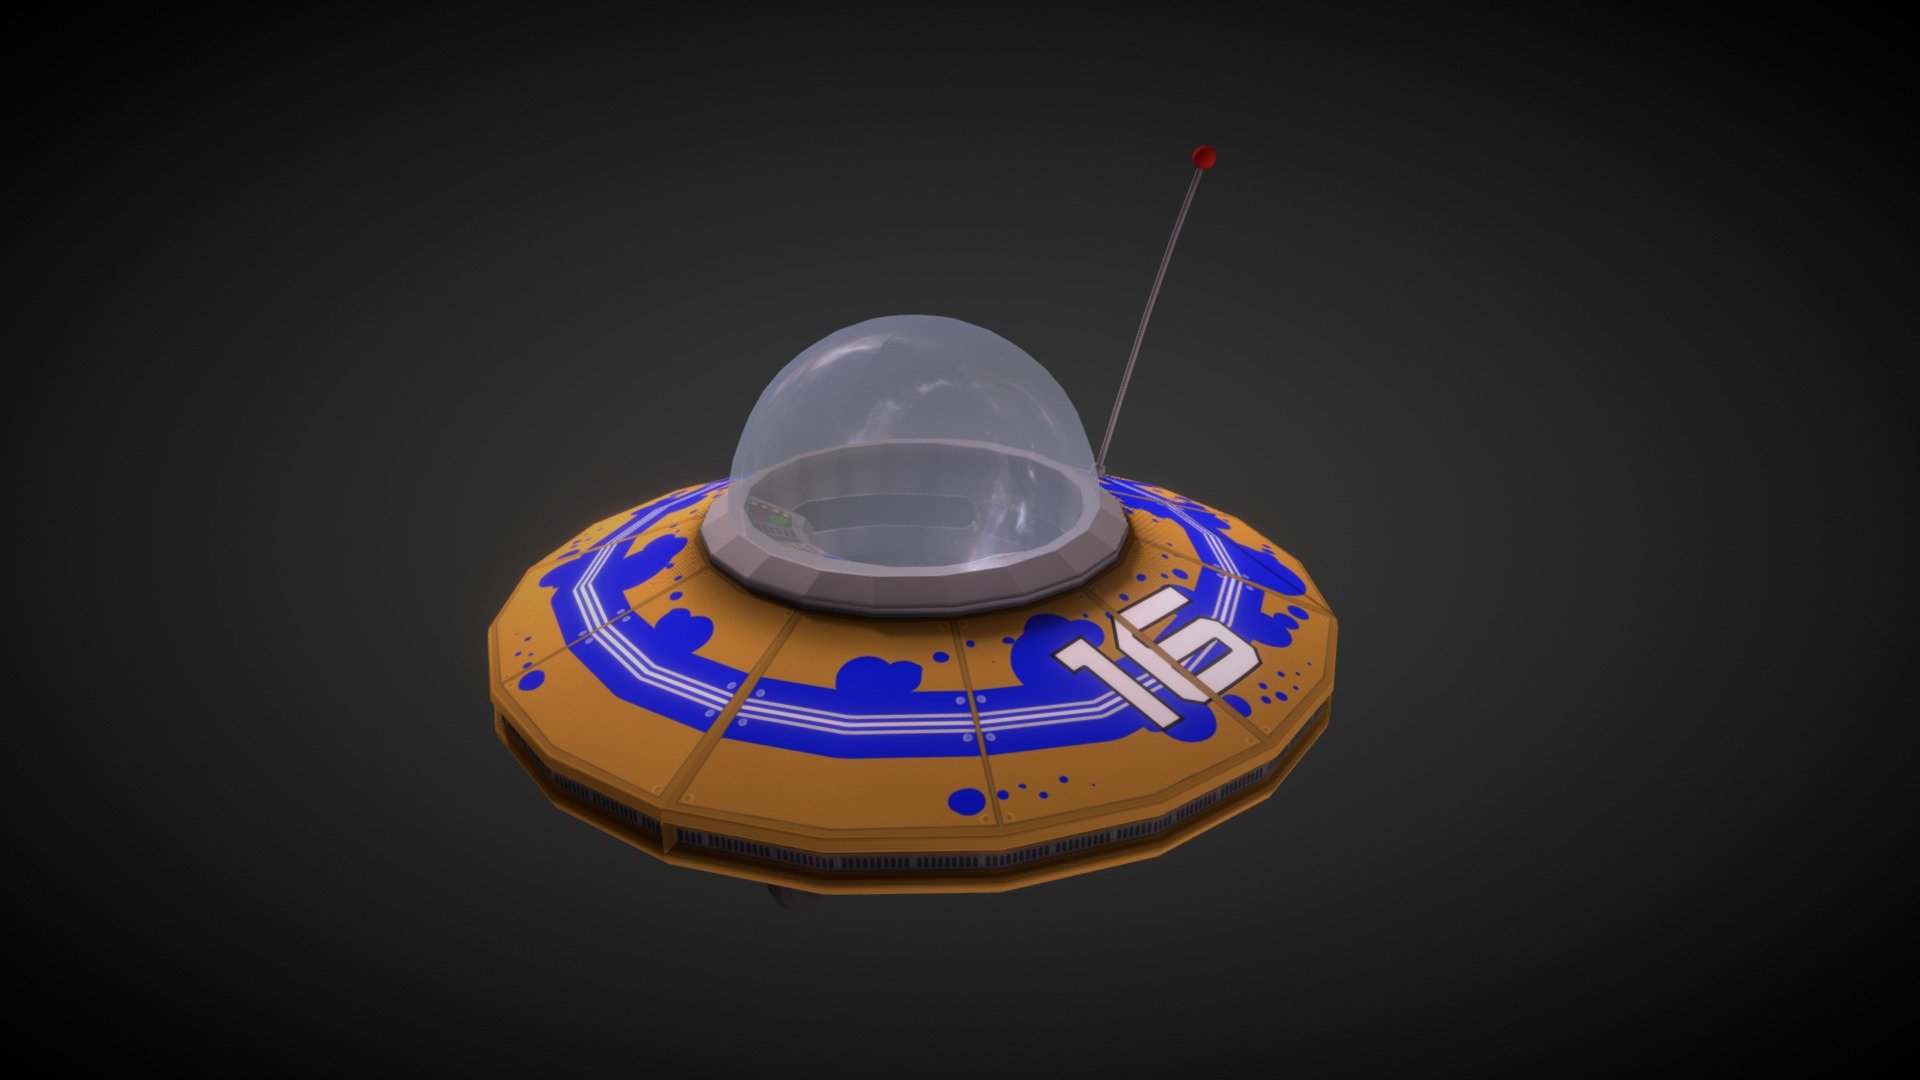 Work for school.
I've made a race UFO for my school 3d model